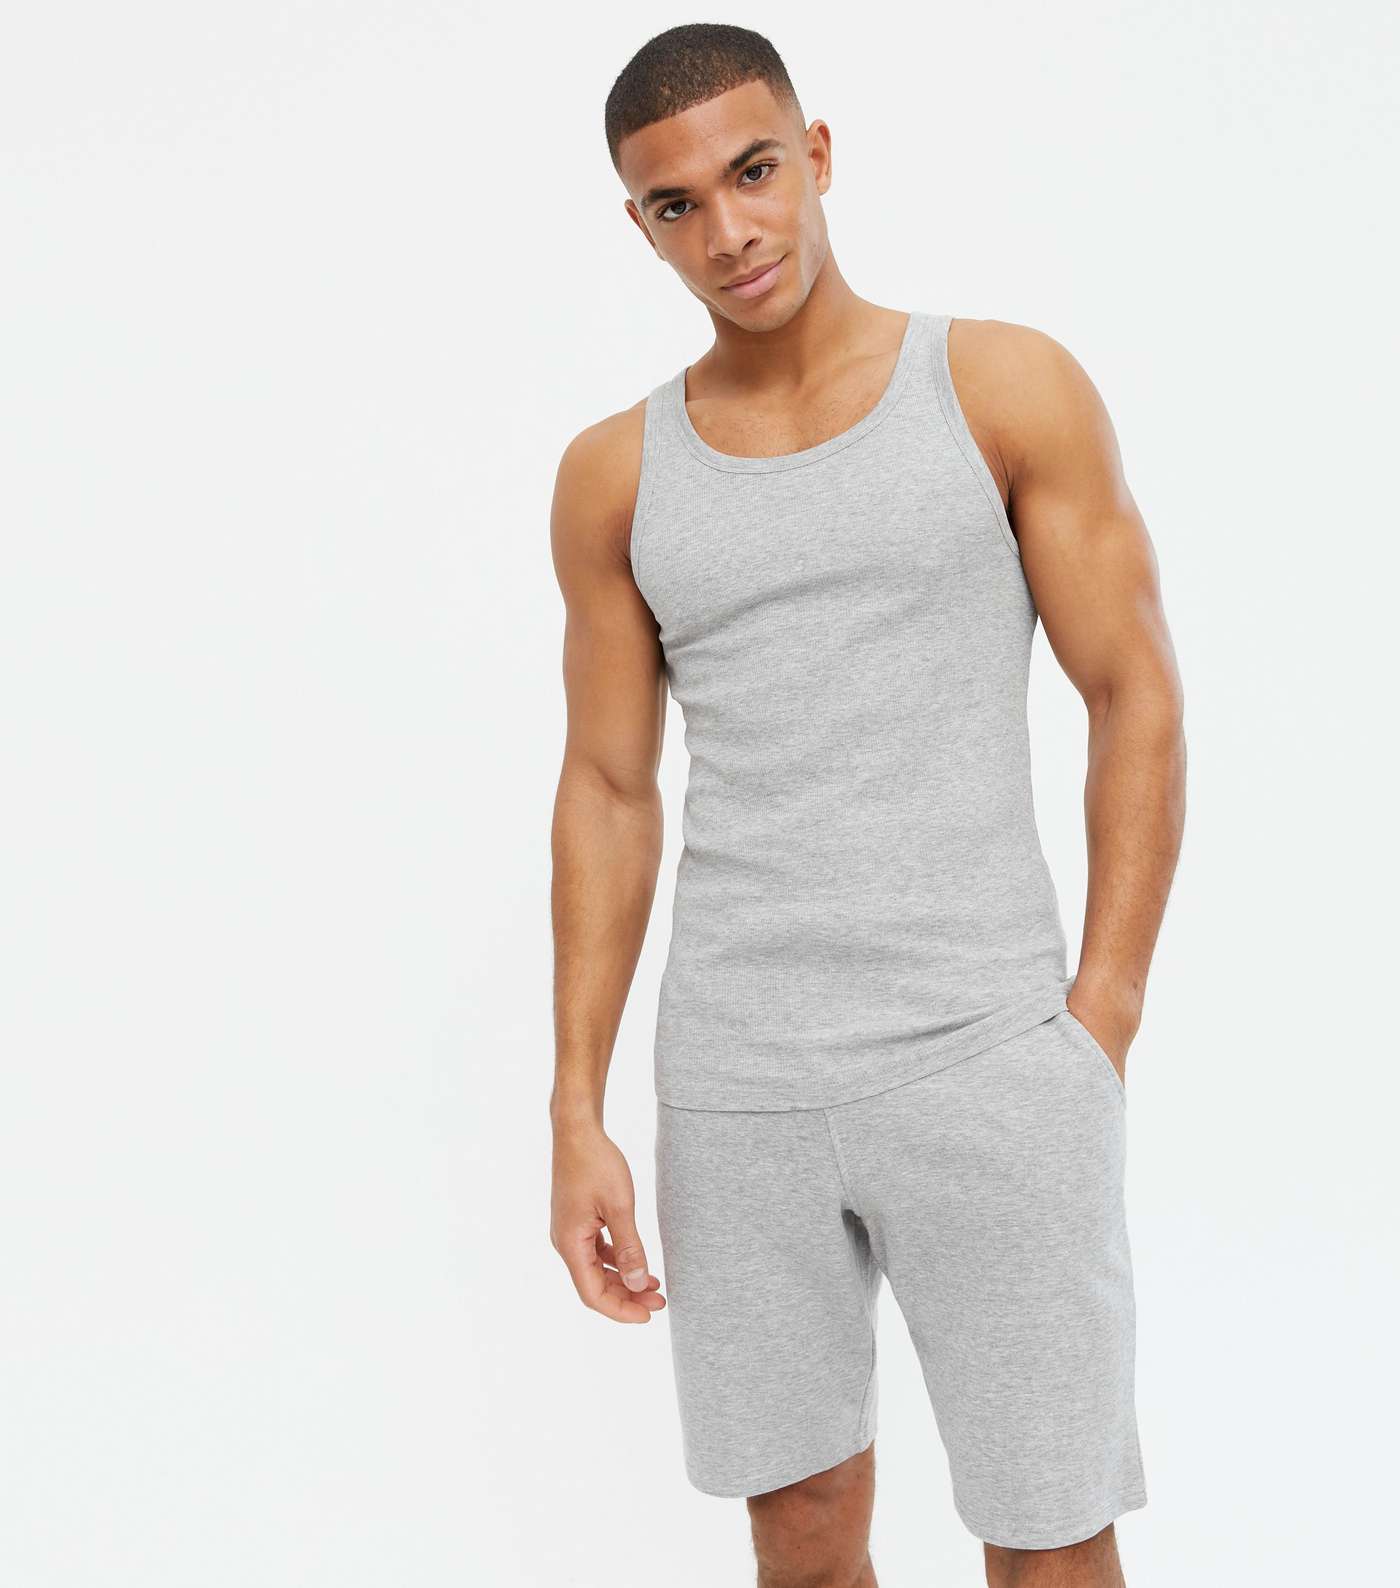 Grey Marl Ribbed Jersey Muscle Fit Vest